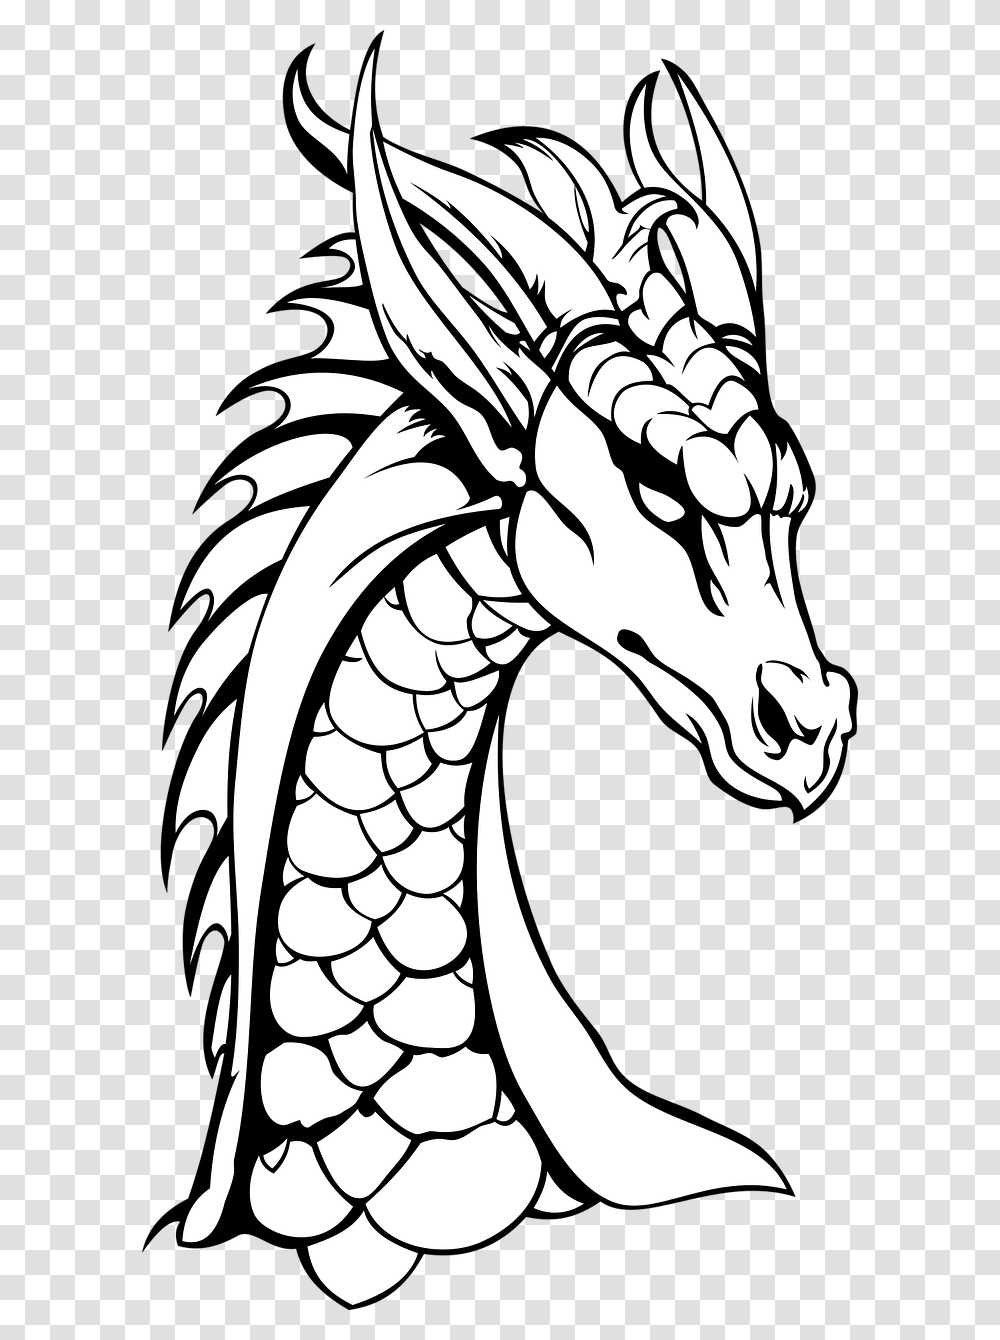 Dragon Neck The Head Of The Free Picture Dragons Black And White Transparent Png